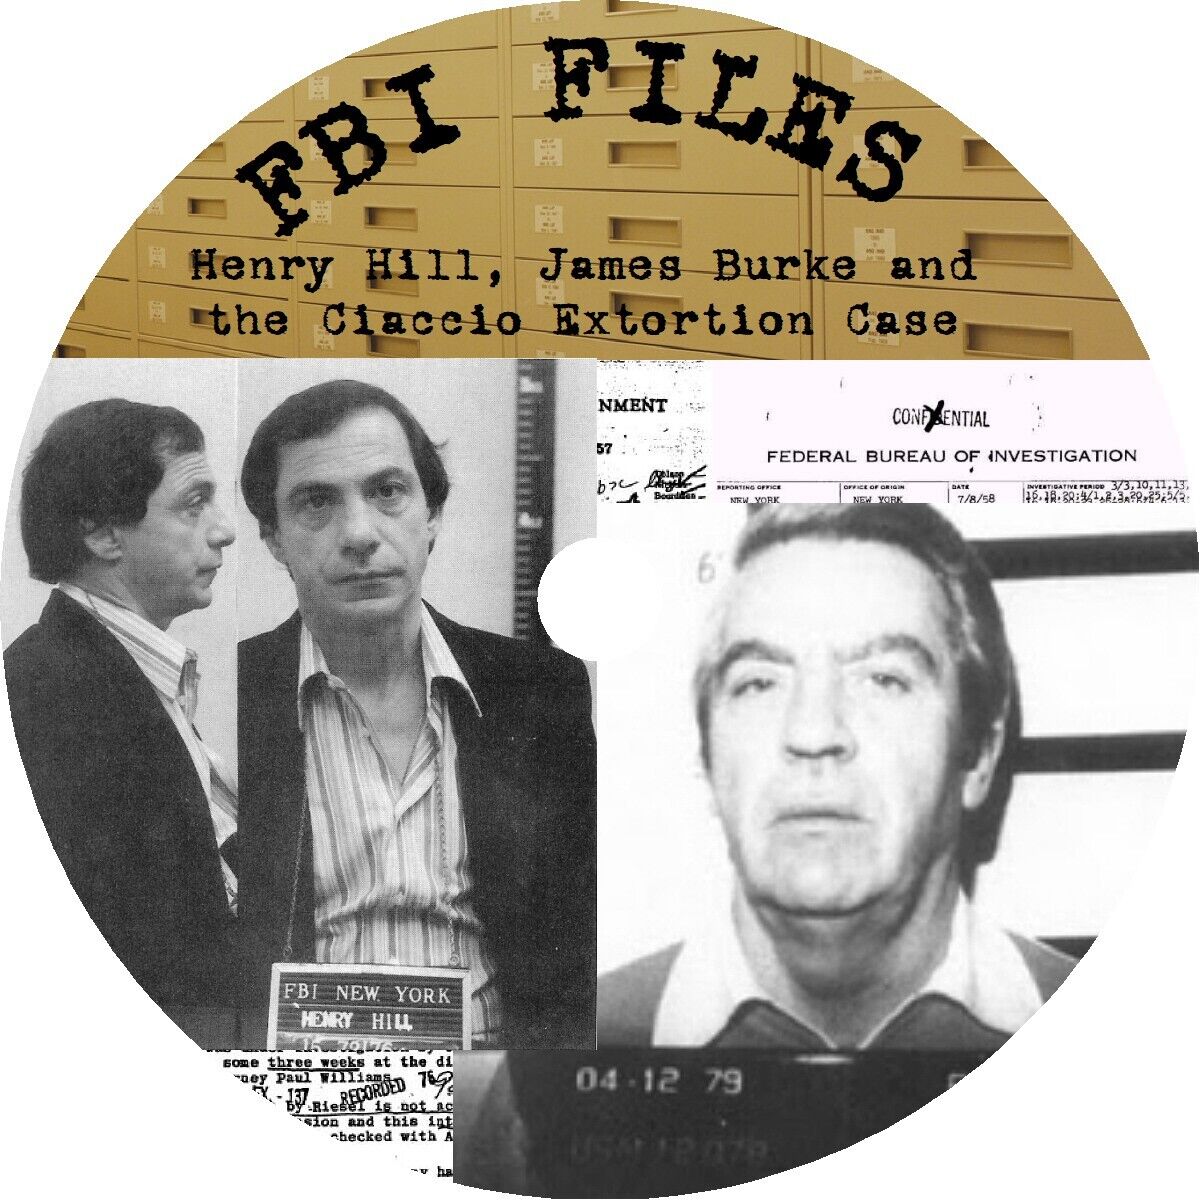 Henry Hill, James Burke and the Ciaccio Extortion Case FBI Files